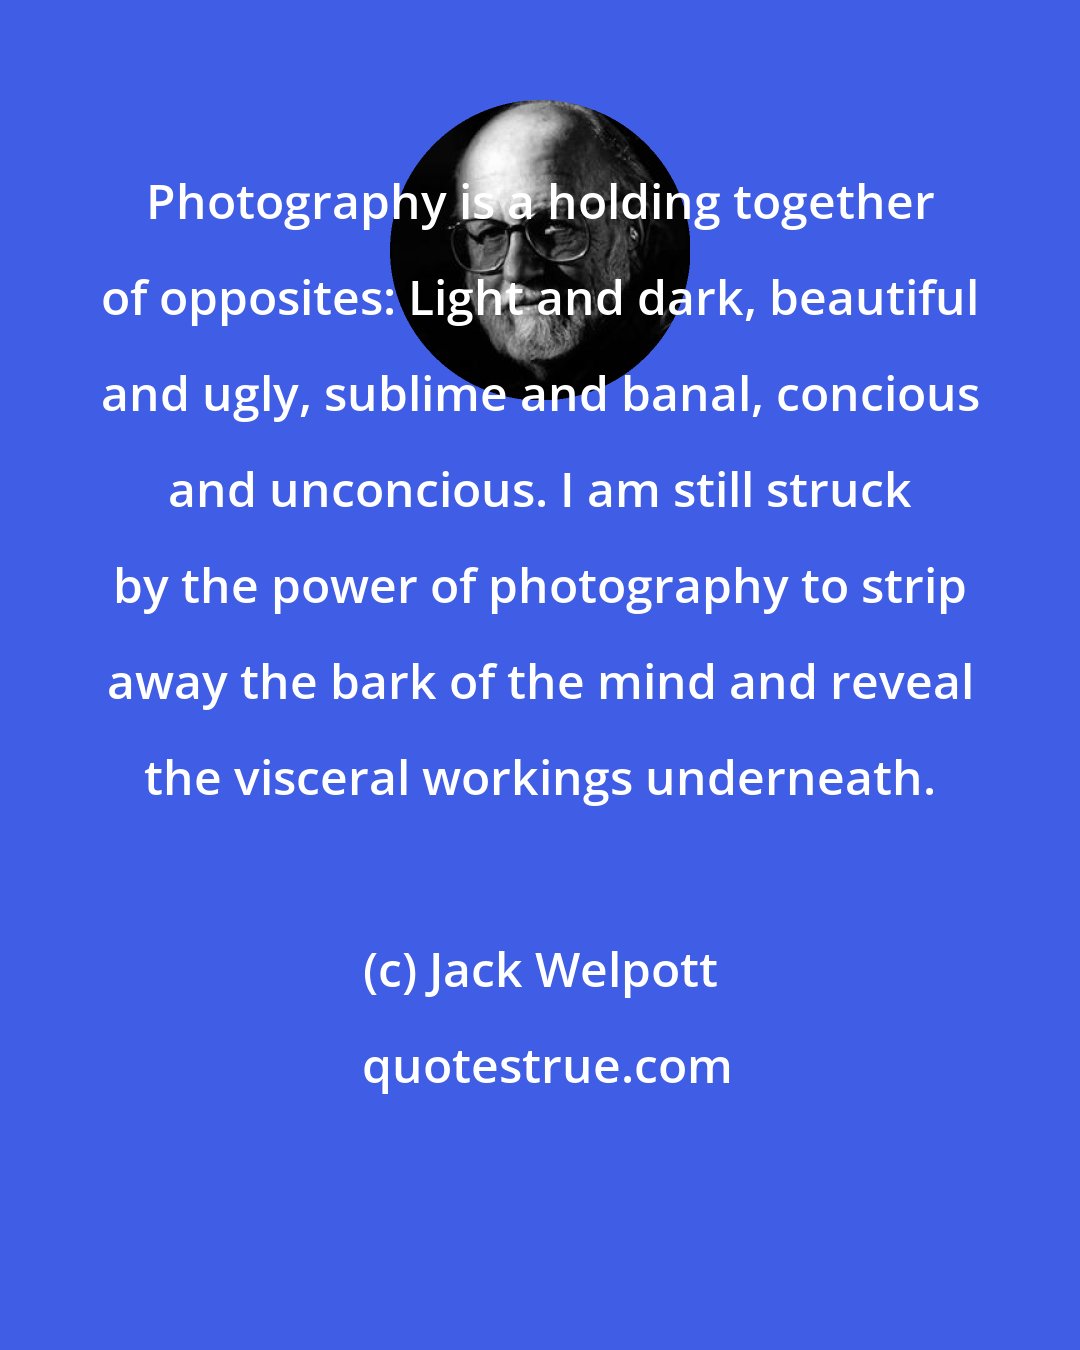 Jack Welpott: Photography is a holding together of opposites: Light and dark, beautiful and ugly, sublime and banal, concious and unconcious. I am still struck by the power of photography to strip away the bark of the mind and reveal the visceral workings underneath.